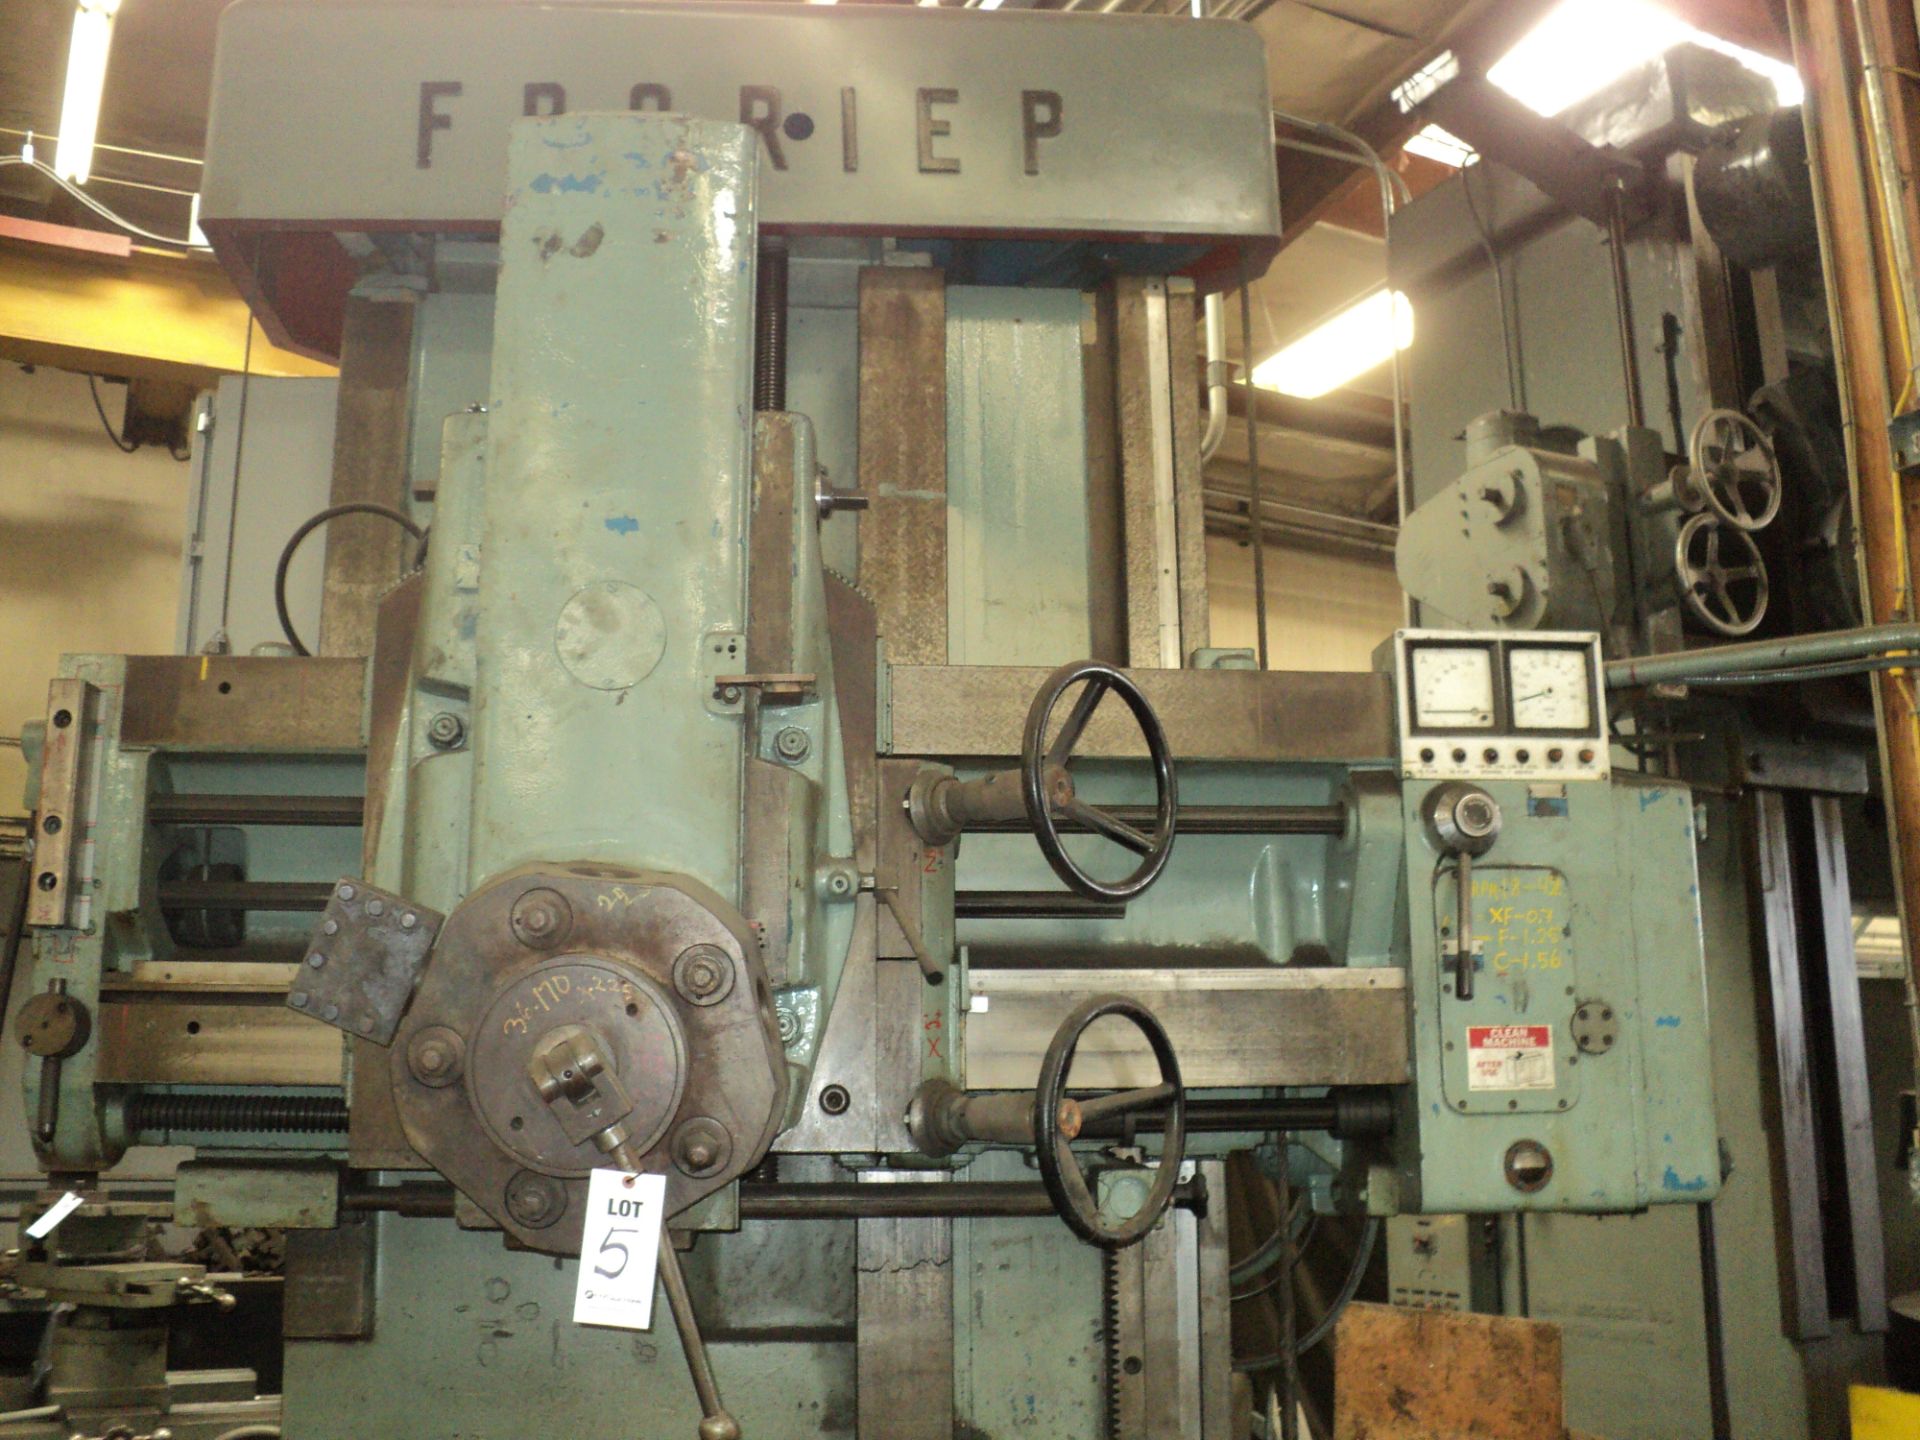 FRORIEP VERTICAL TURRET LATHE, 48" SWING, 4 JAW CHUCK, 5 STATION TURRET, 48" CROSS RAIL, 50 HP, - Image 4 of 5